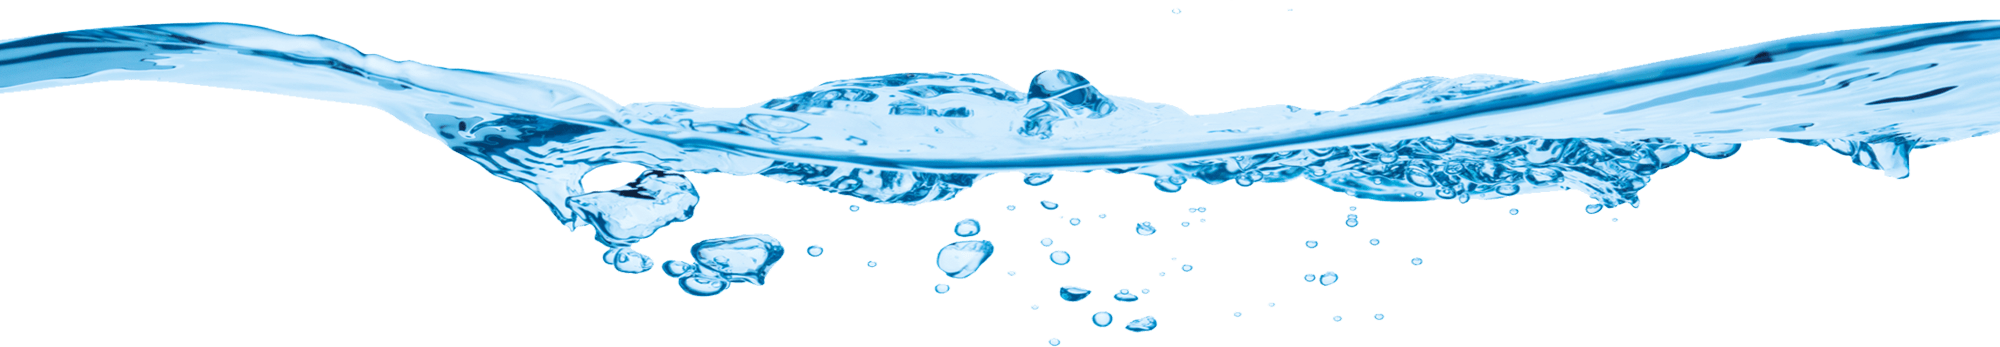 water-divider.png